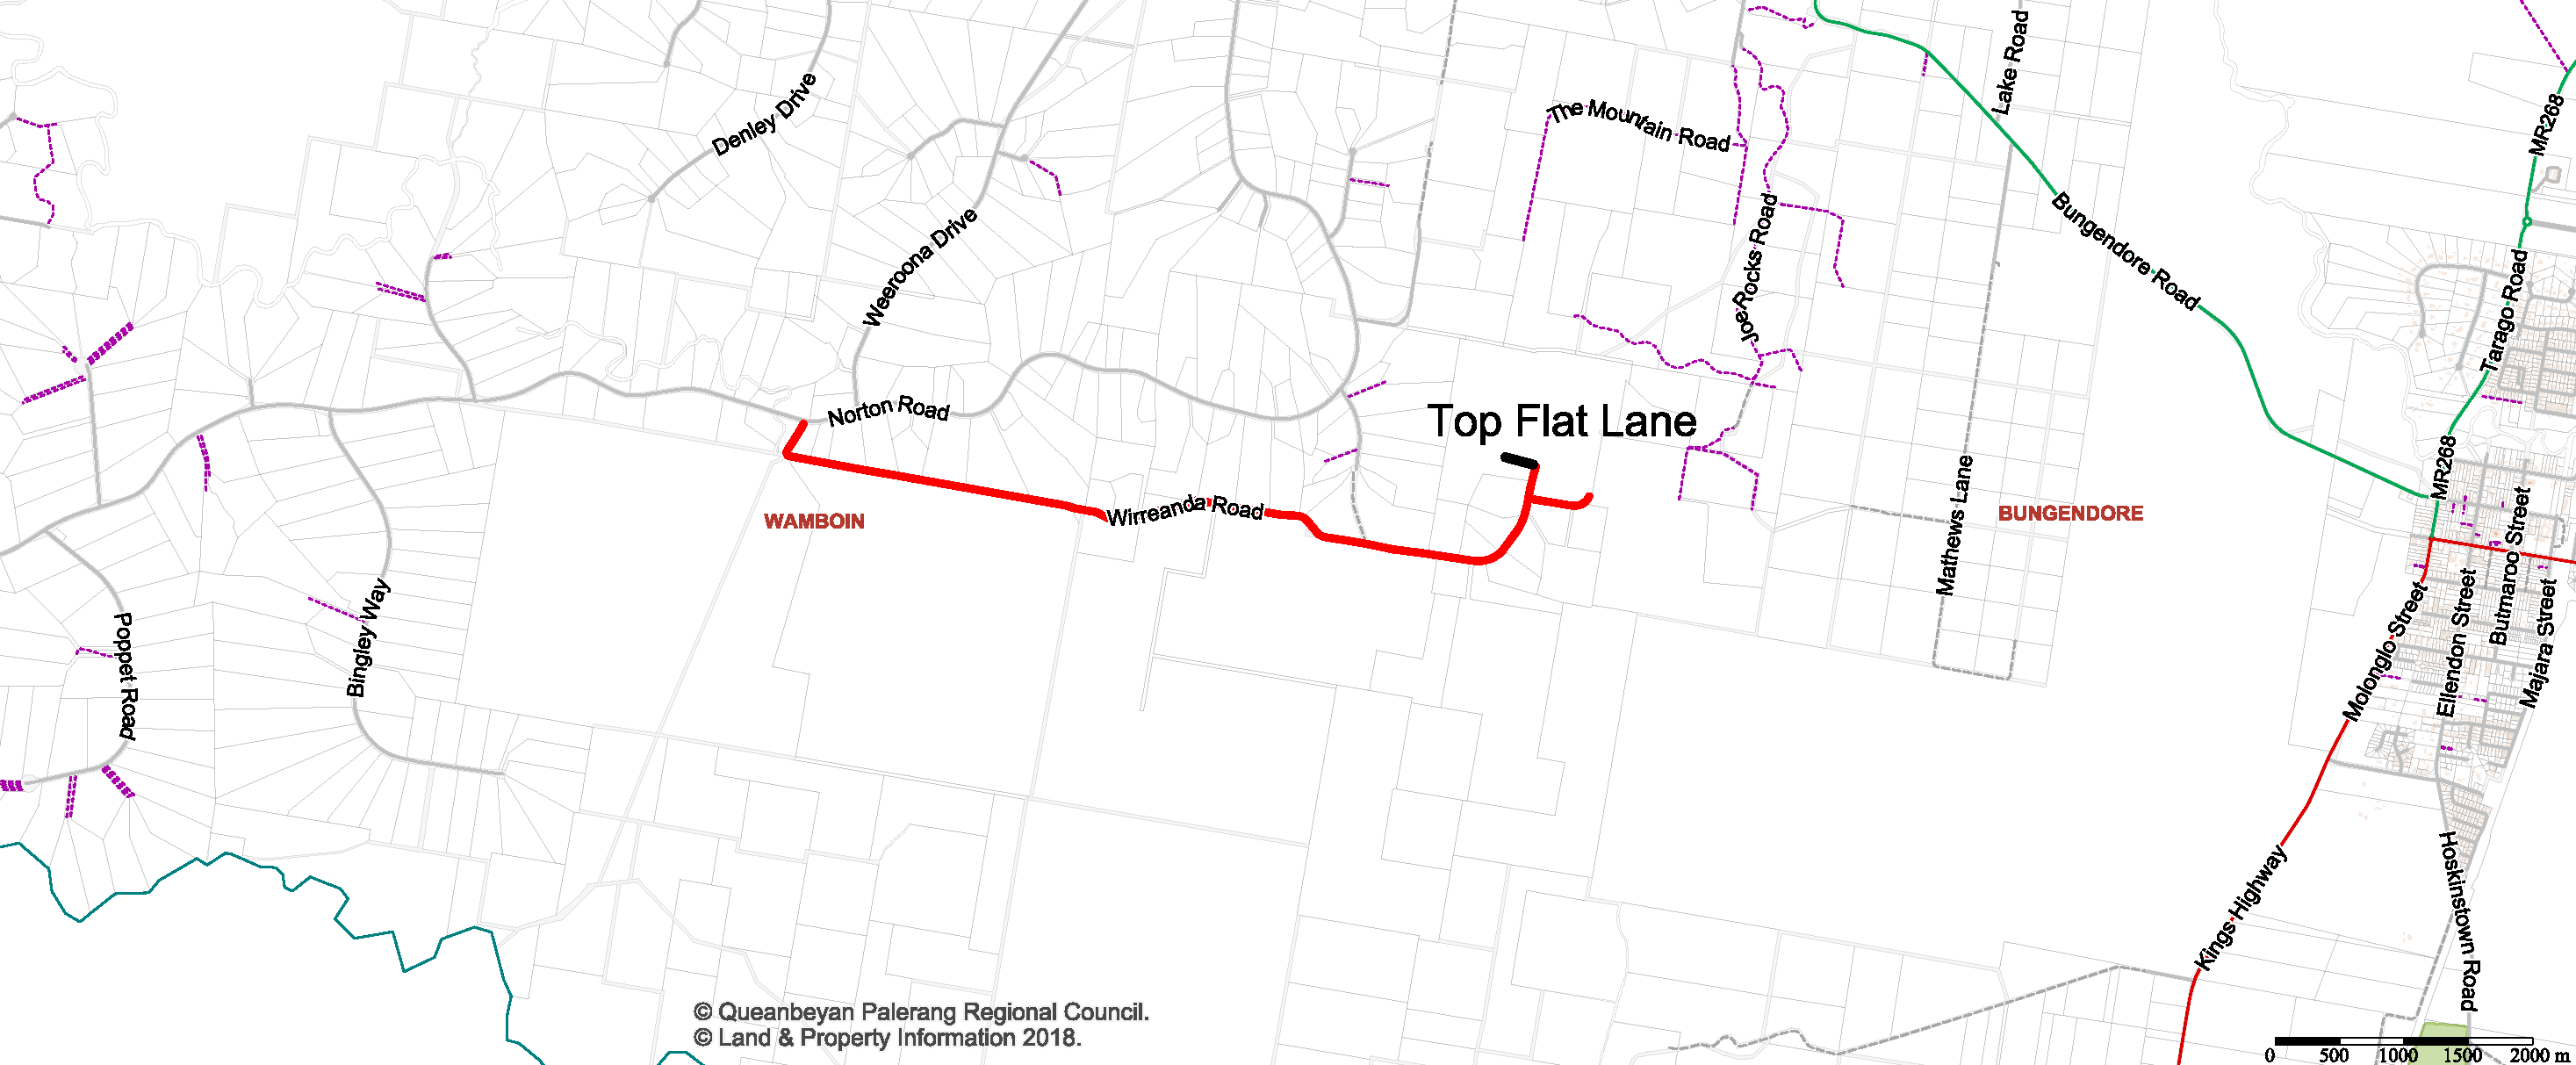 Map showing the location of Top Flat Lane